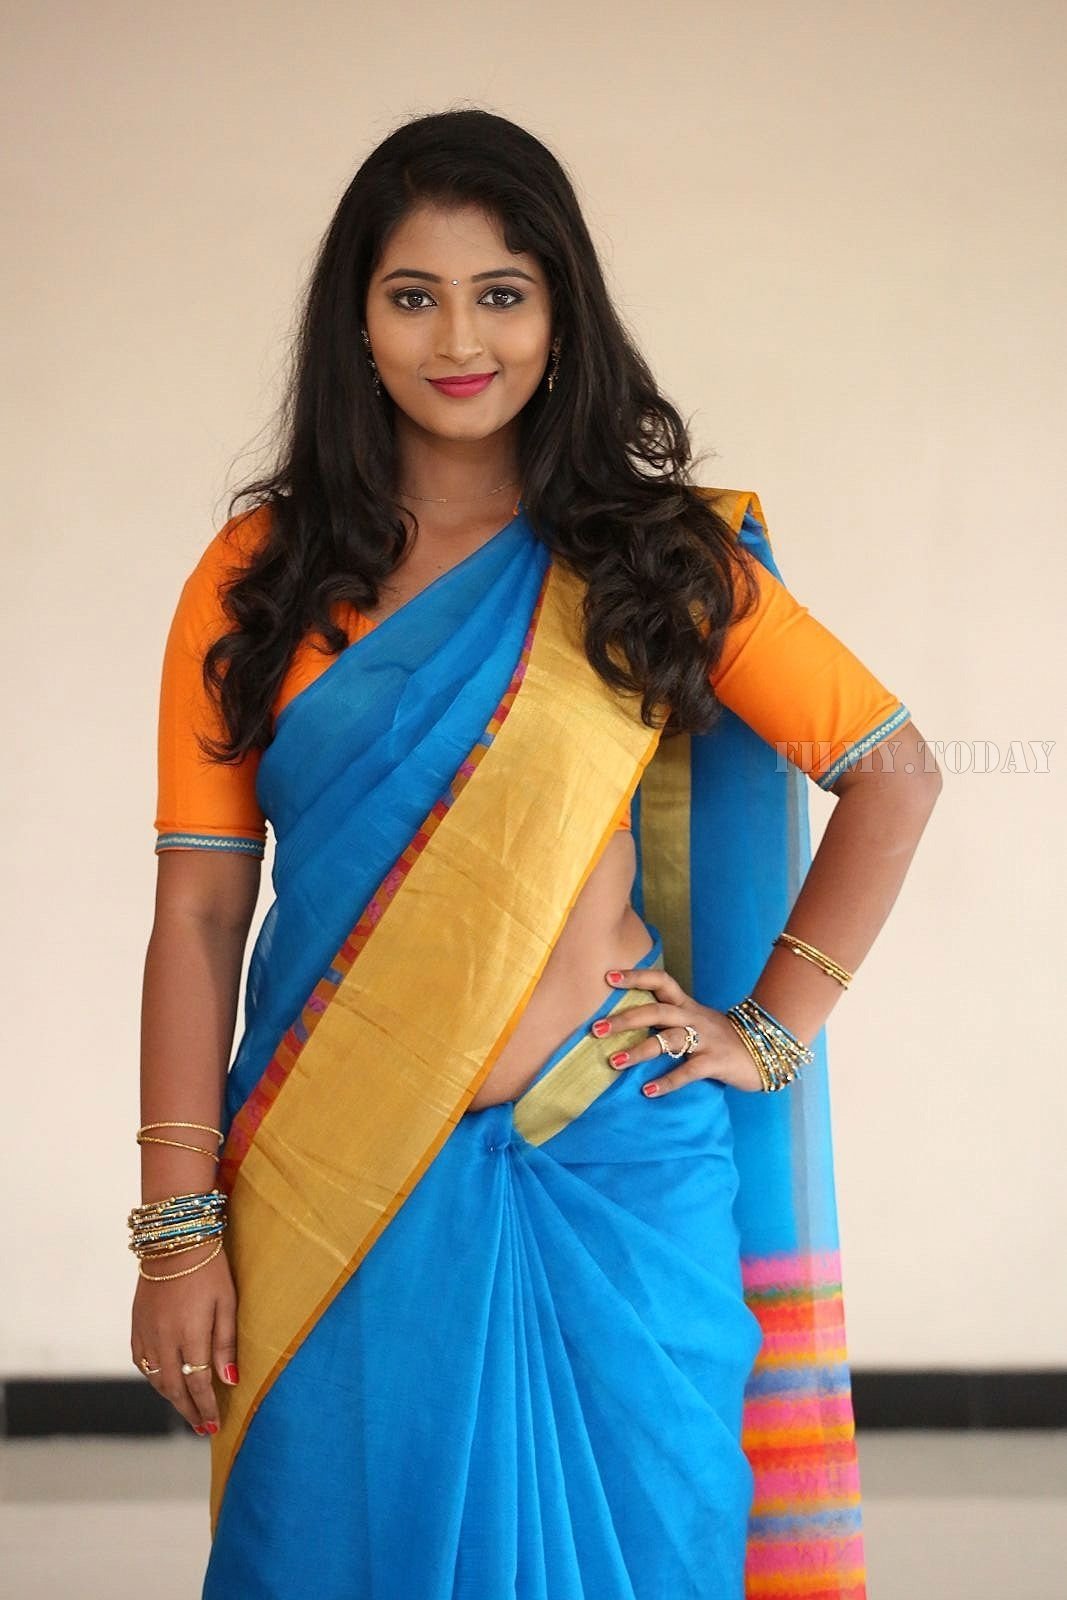 Actress Teja Reddy Hot in Saree Latest Photos | Picture 1551308